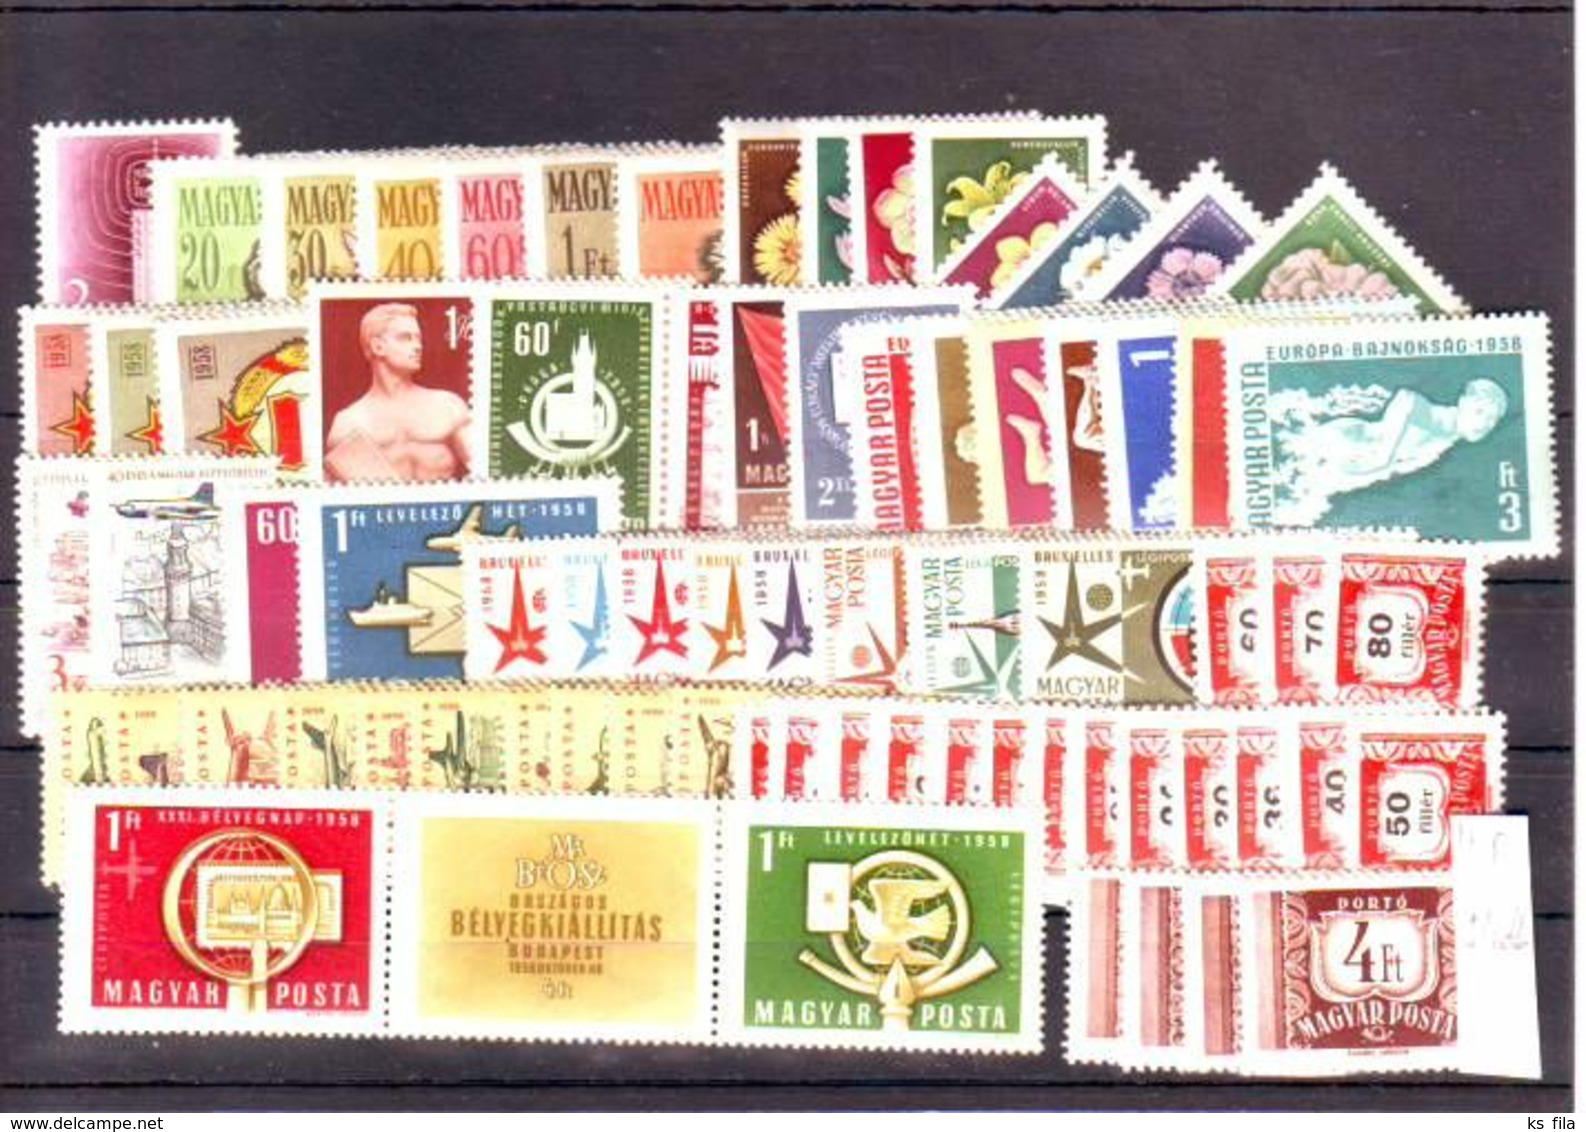 HUNGARY 1958 Full Year 54 Stamps + 3 Souvenir Sheets MNH - Années Complètes